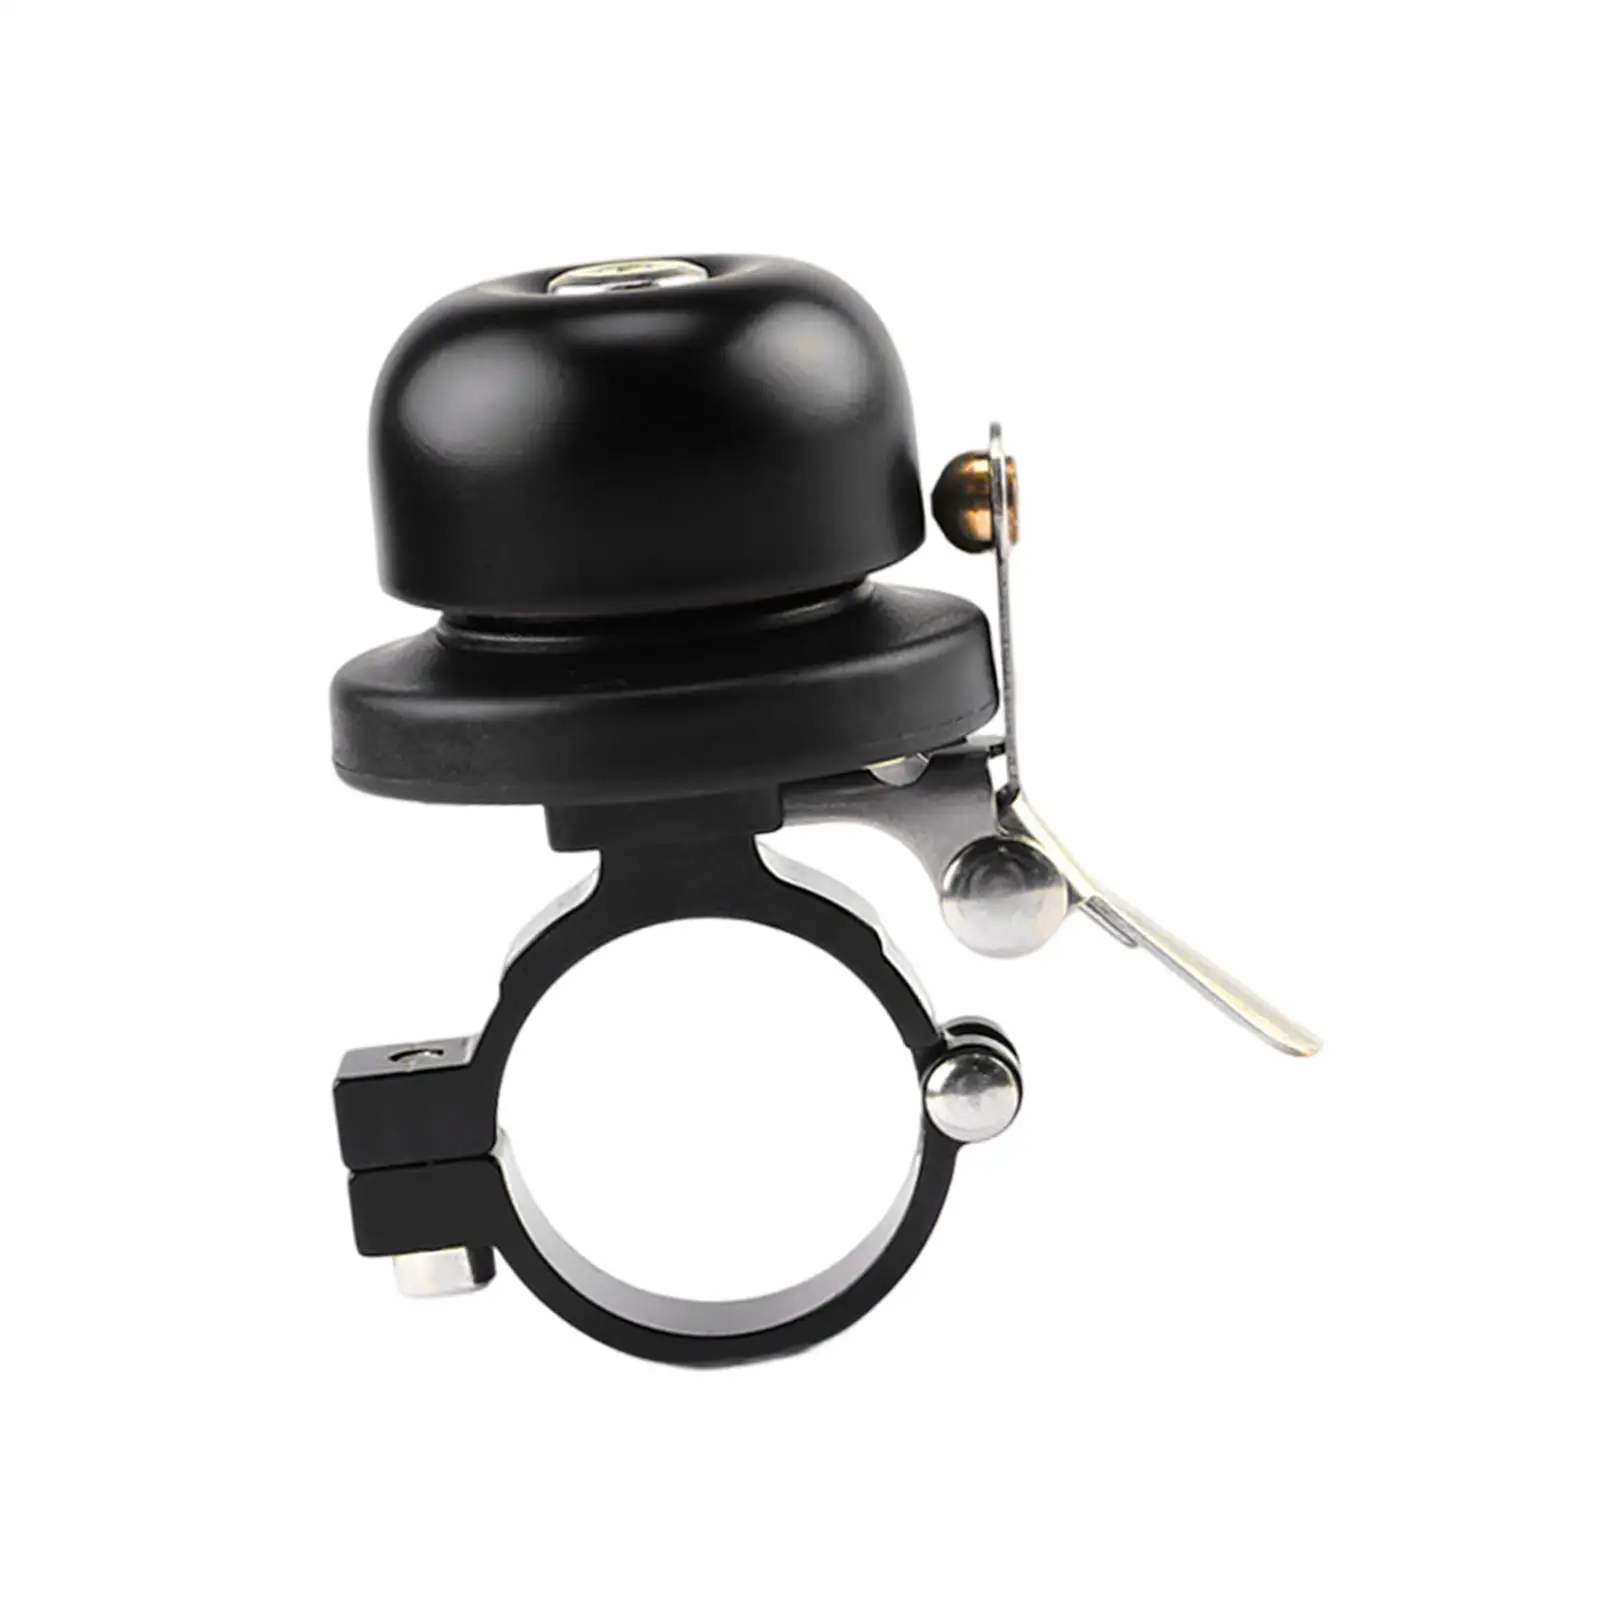 Bike Bell Bell Lightweight Aluminum Alloy Modern Loud Ringing Sound Adults for Riding Outdoor Road Bike Accessories